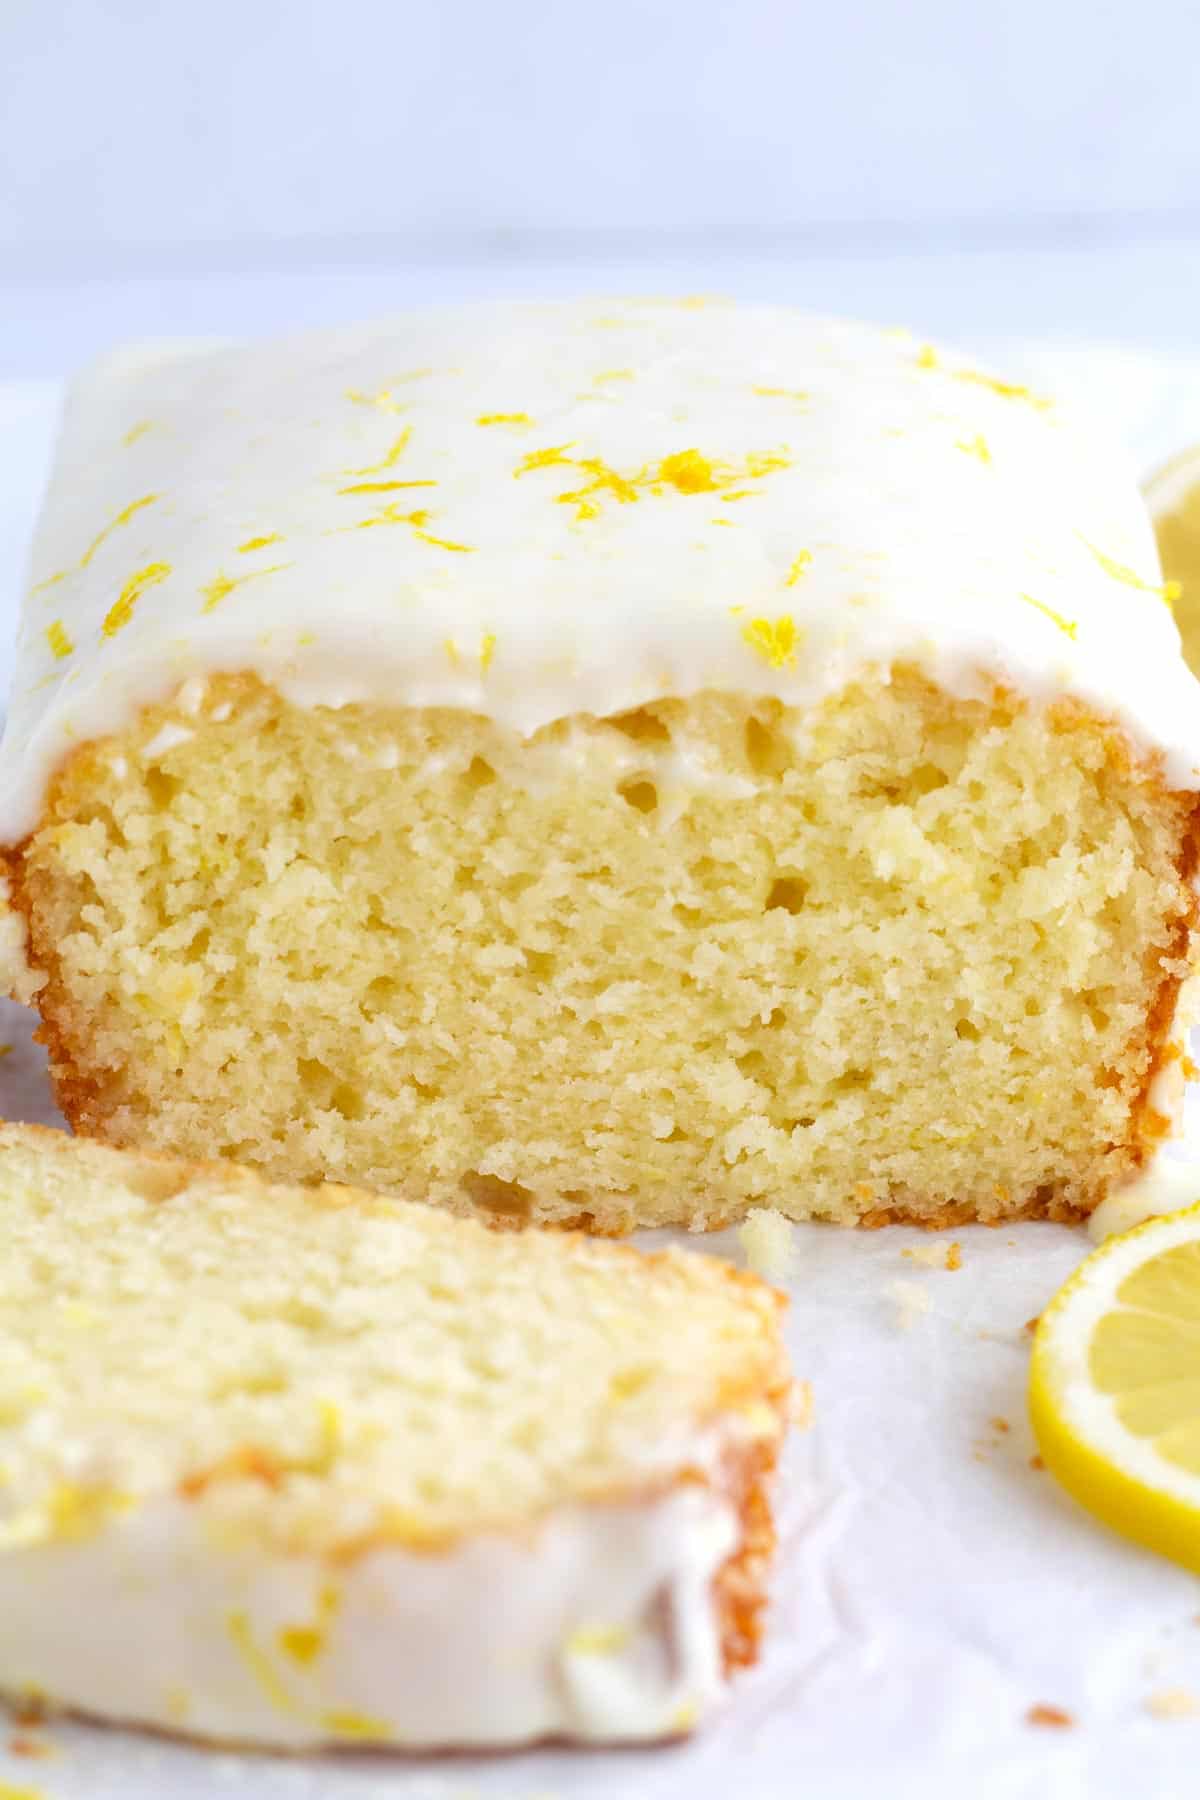 Loaf cake slice open with a thick layer of lemon glaze on top and a slice of cake in the foreground.